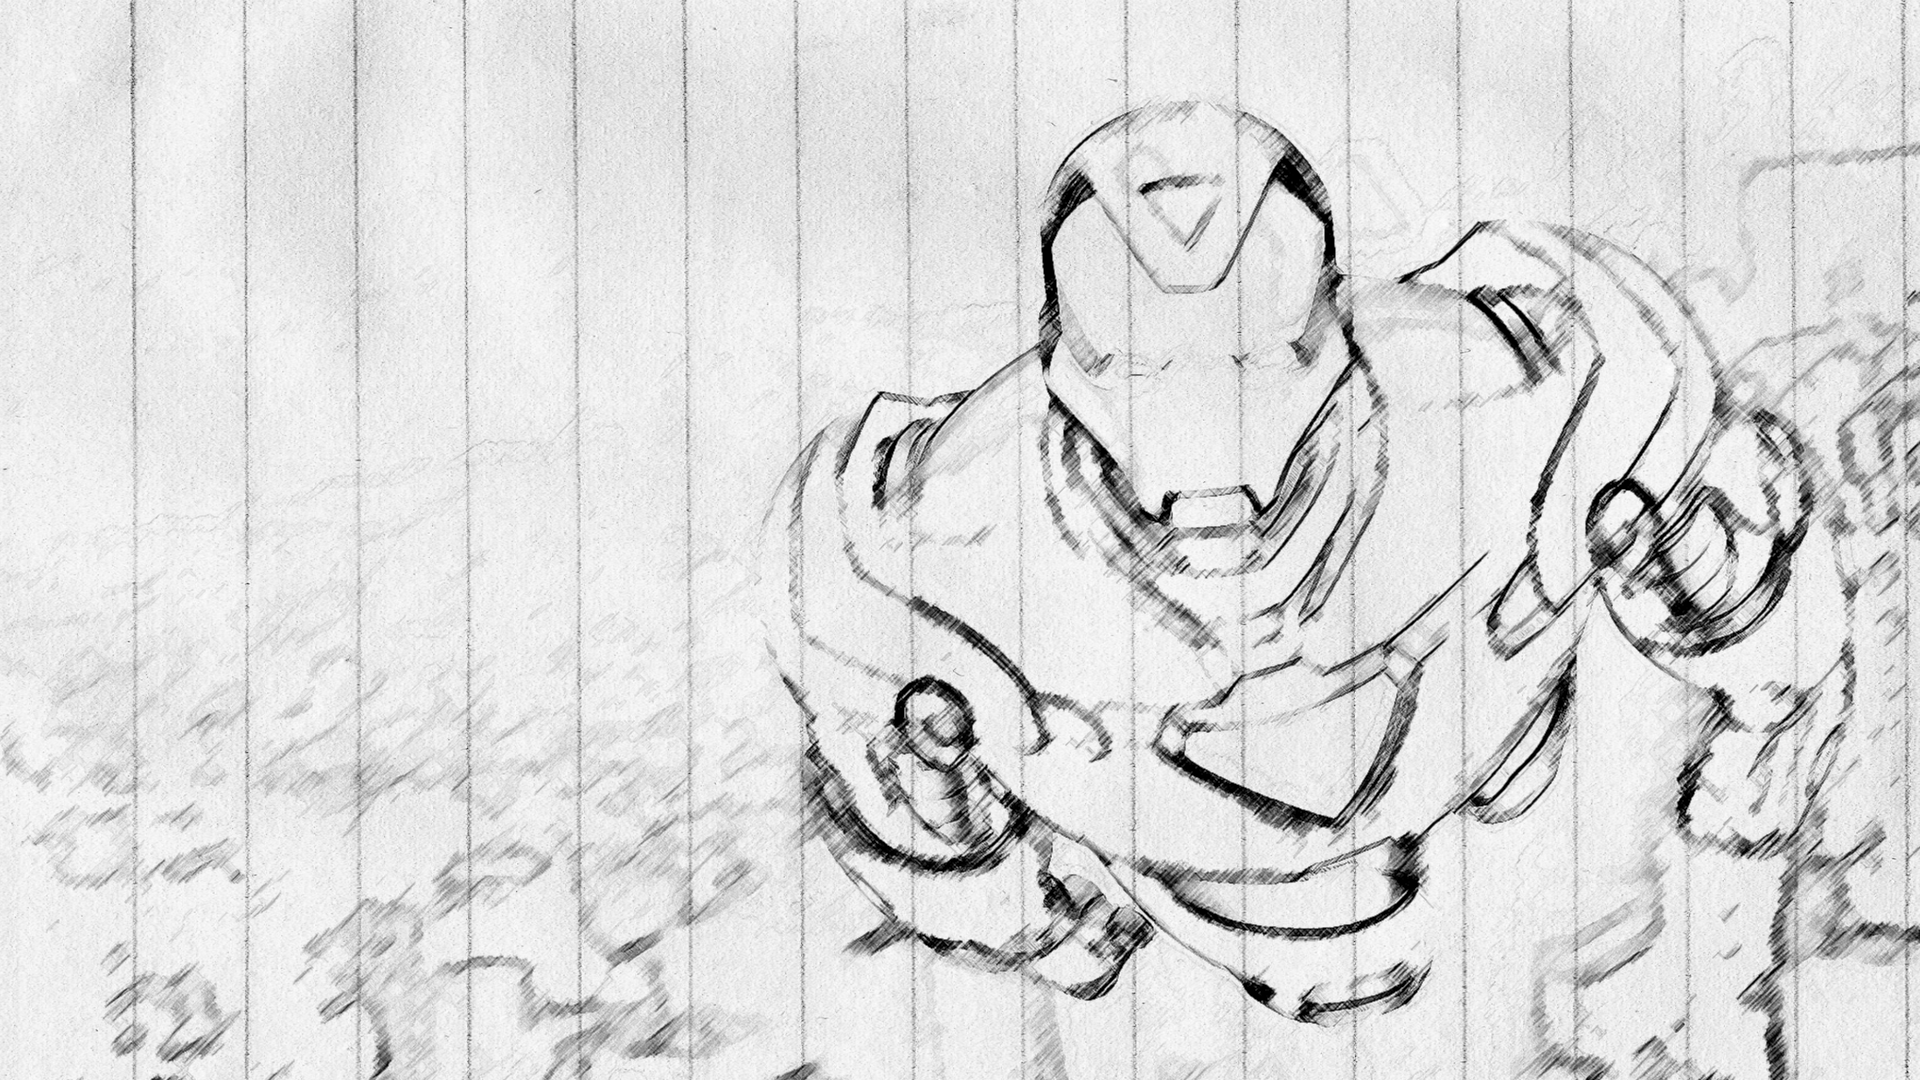 How to draw Iron Man step by step